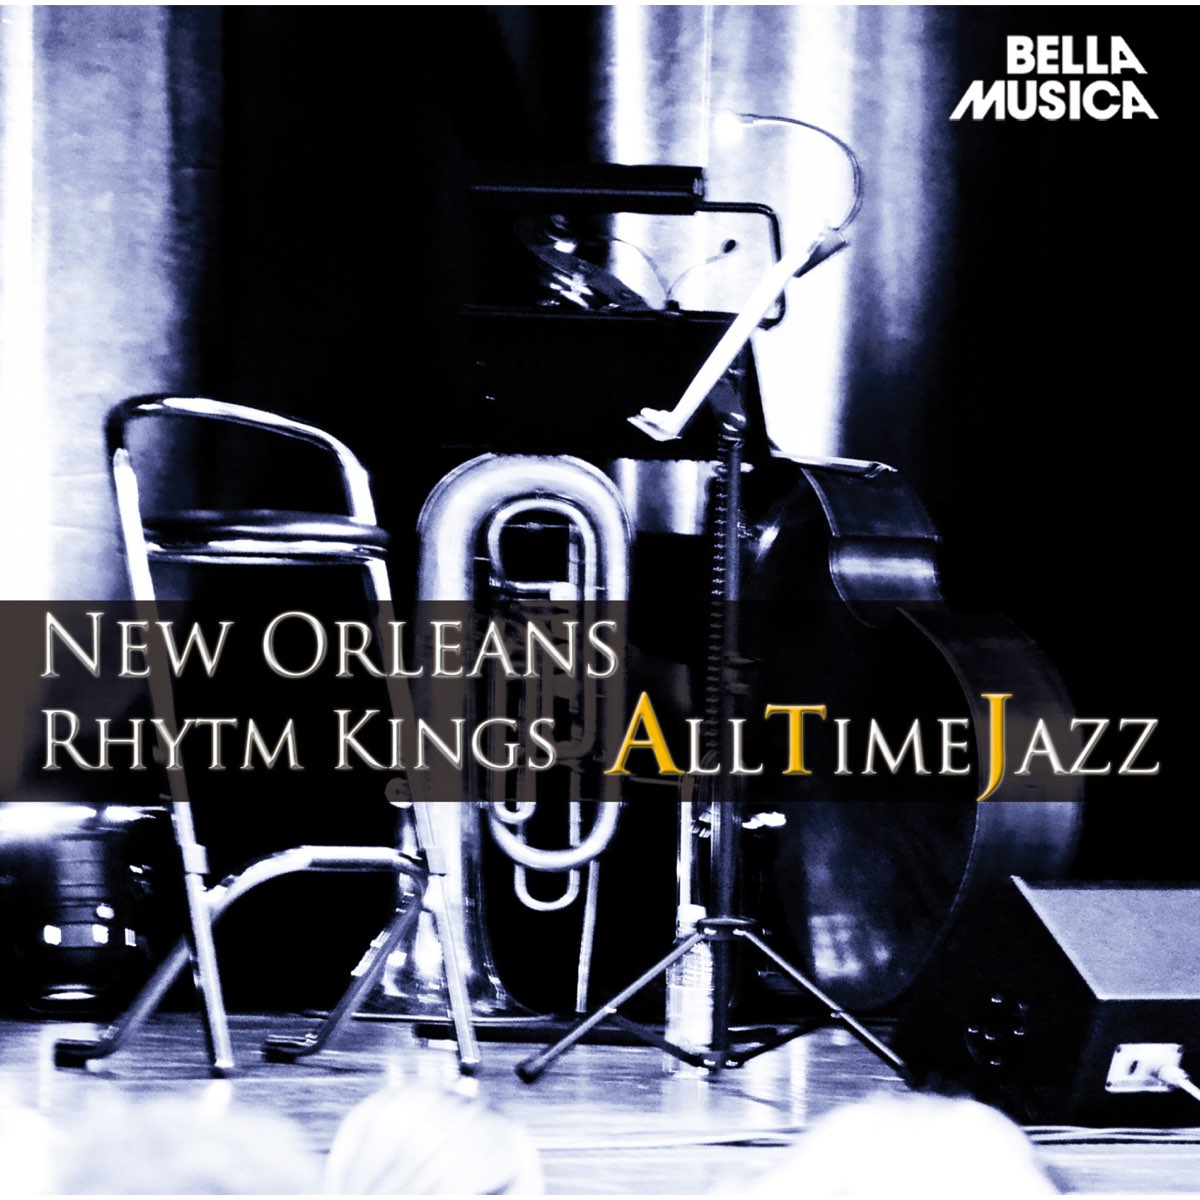 ‎all Time Jazz New Orleans Rhythm Kings By The New Orleans Rhythm Kings On Apple Music 2609